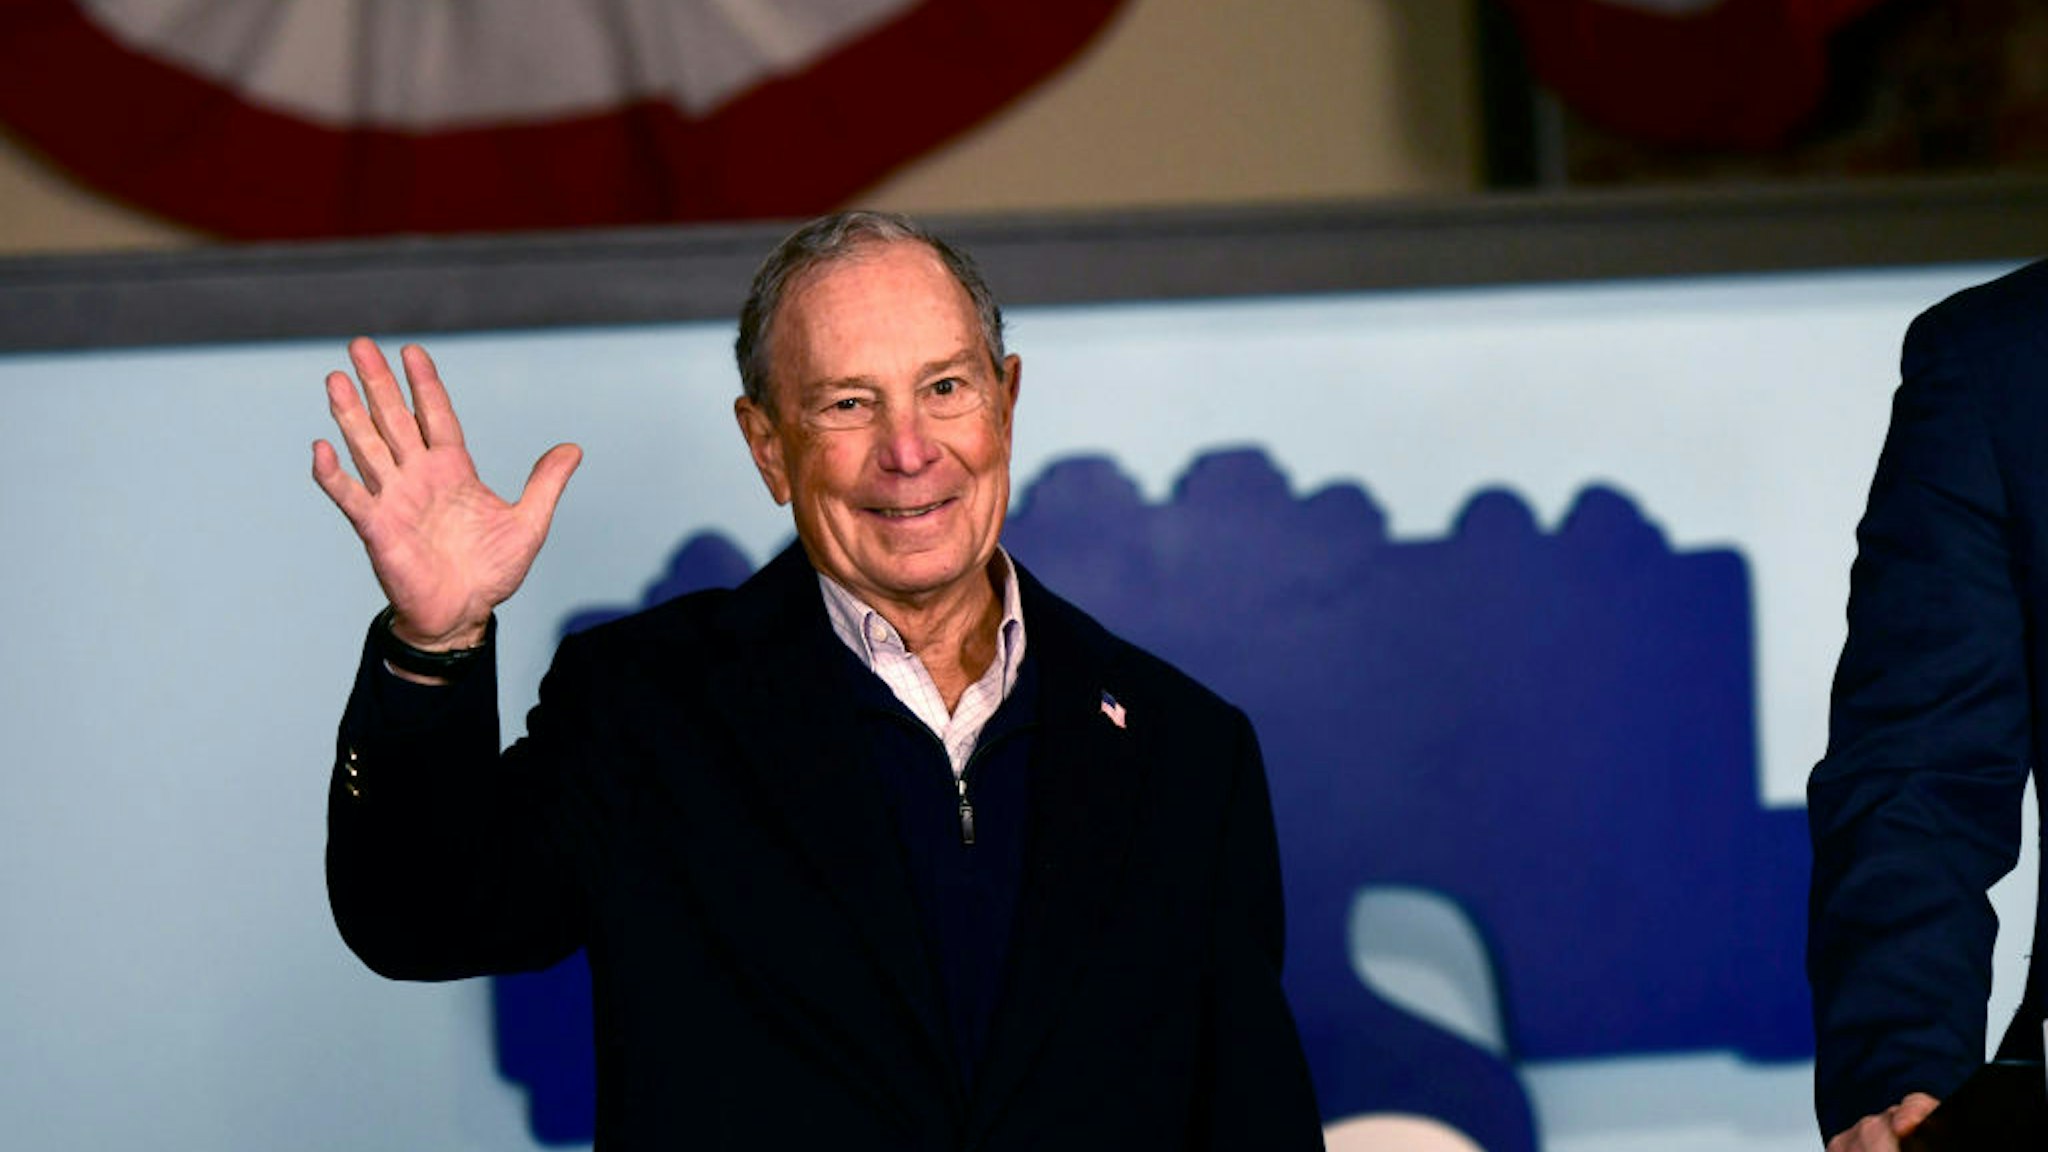 PHILADELPHIA, PA - DECEMBER 21: Democratic Presidential candidate Michael Bloomberg waves to supporters from his newly opened Philadelphia field office on December 21, 2019 in Philadelphia, Pennsylvania. The former Mayor of New York entered the race late and is not contesting the early primary states, instead concentrating efforts towards Super Tuesday and beyond, opening campaign offices today in Pennsylvania, Michigan, and Wisconsin.